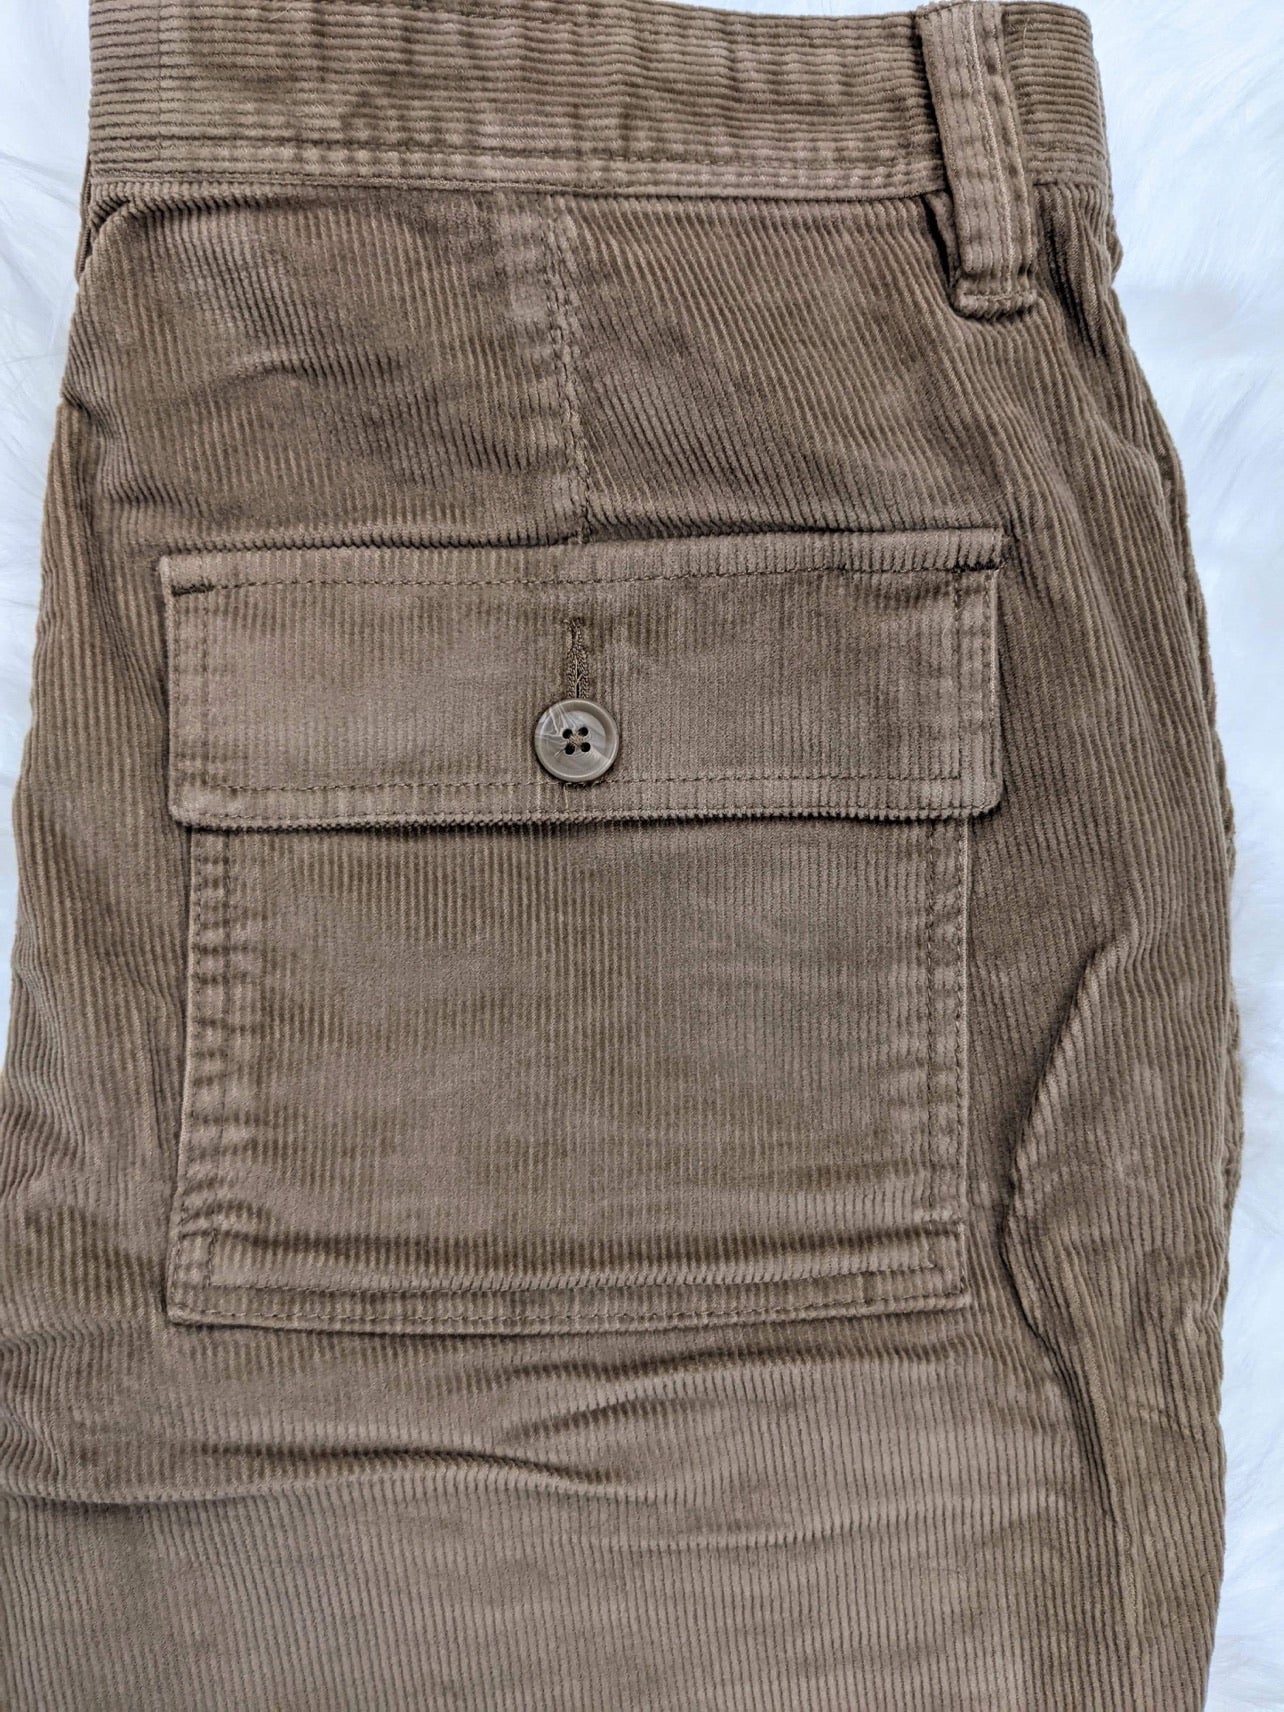 retro vintage style corduroy shorts fatigue style pockets military army style brown mens shorts 